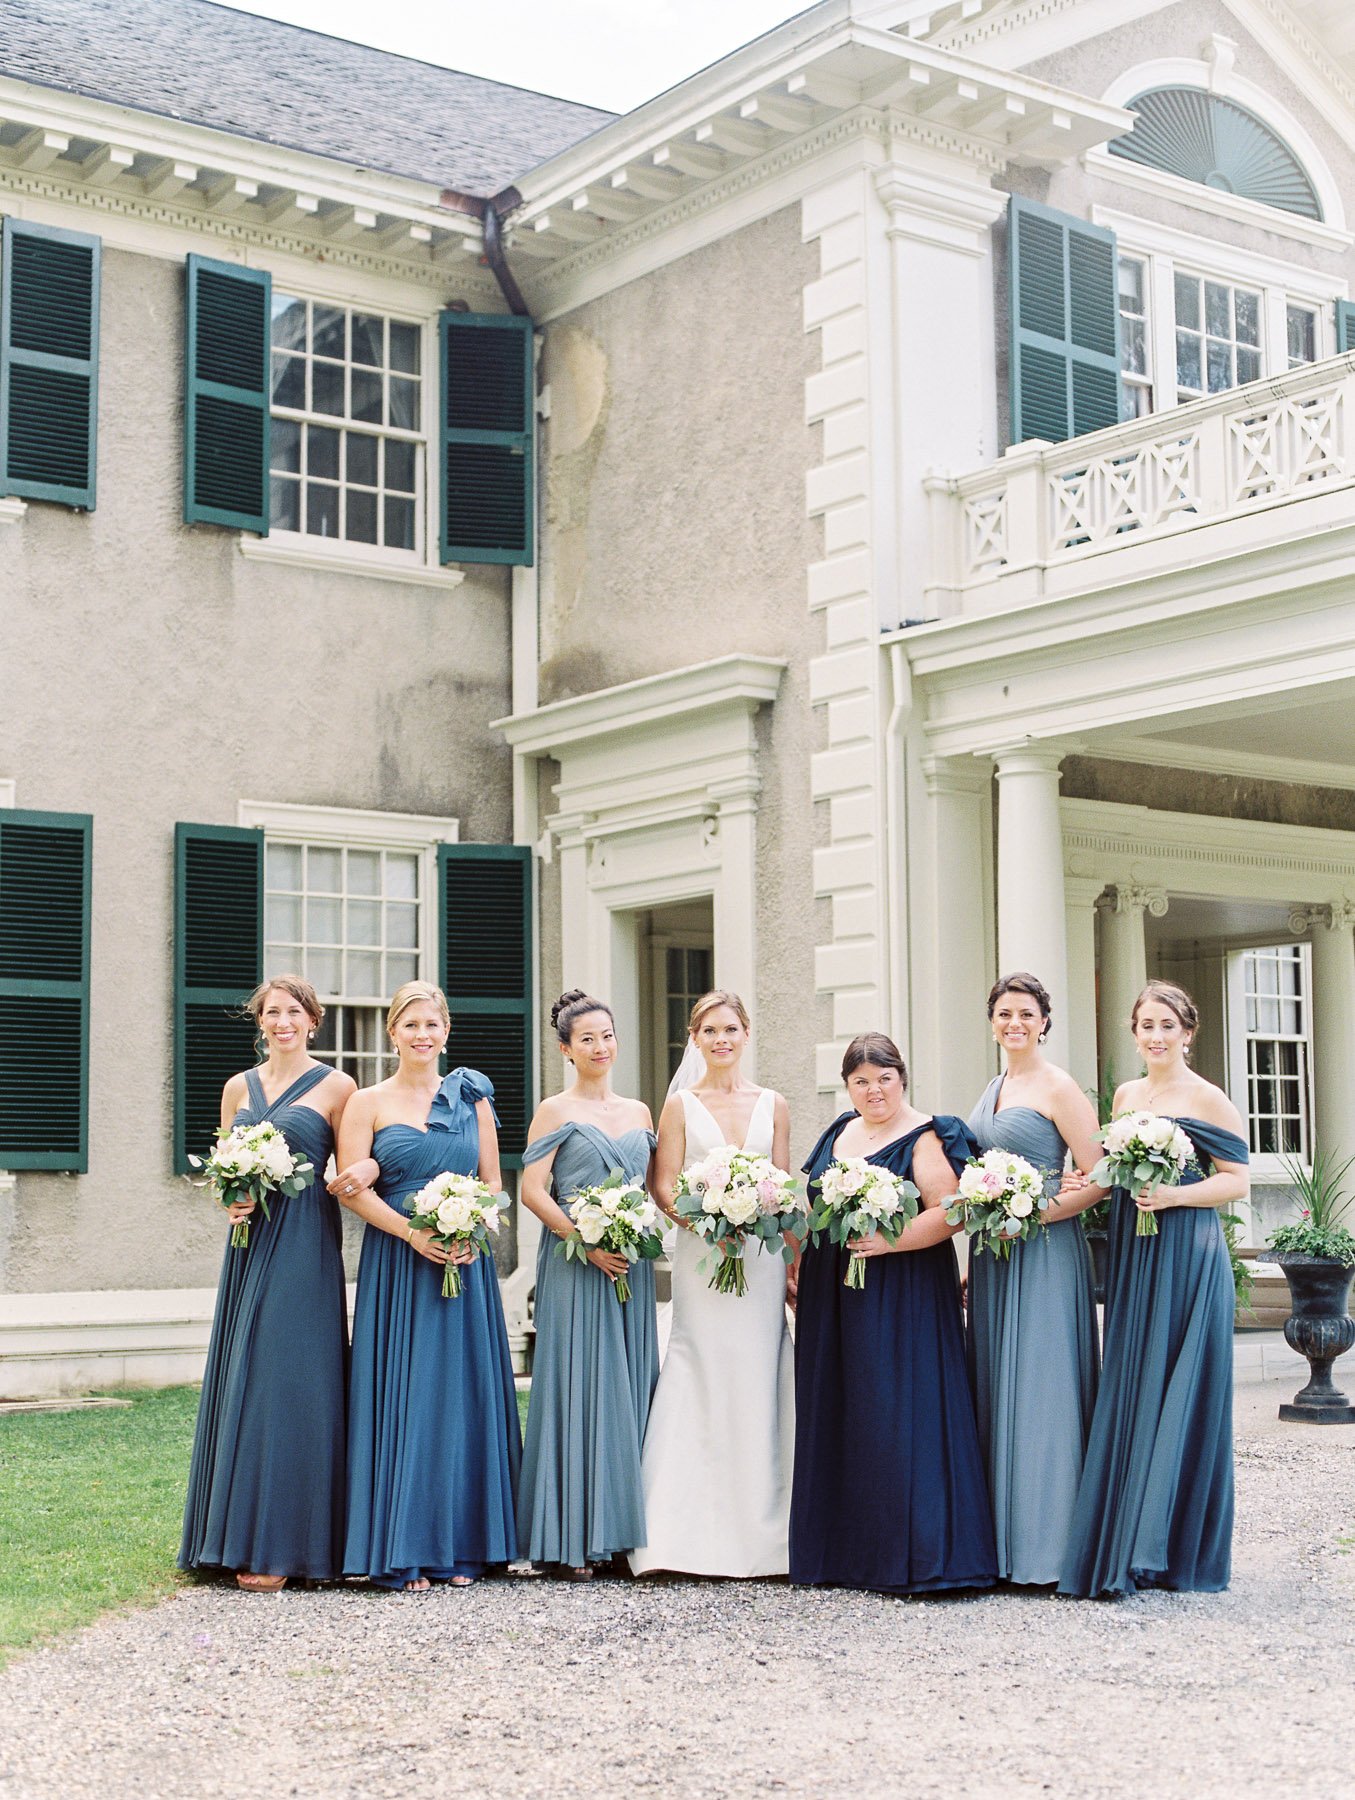 Manchester Vermont Wedding Bridesmaids in Shades of Blue Dresses